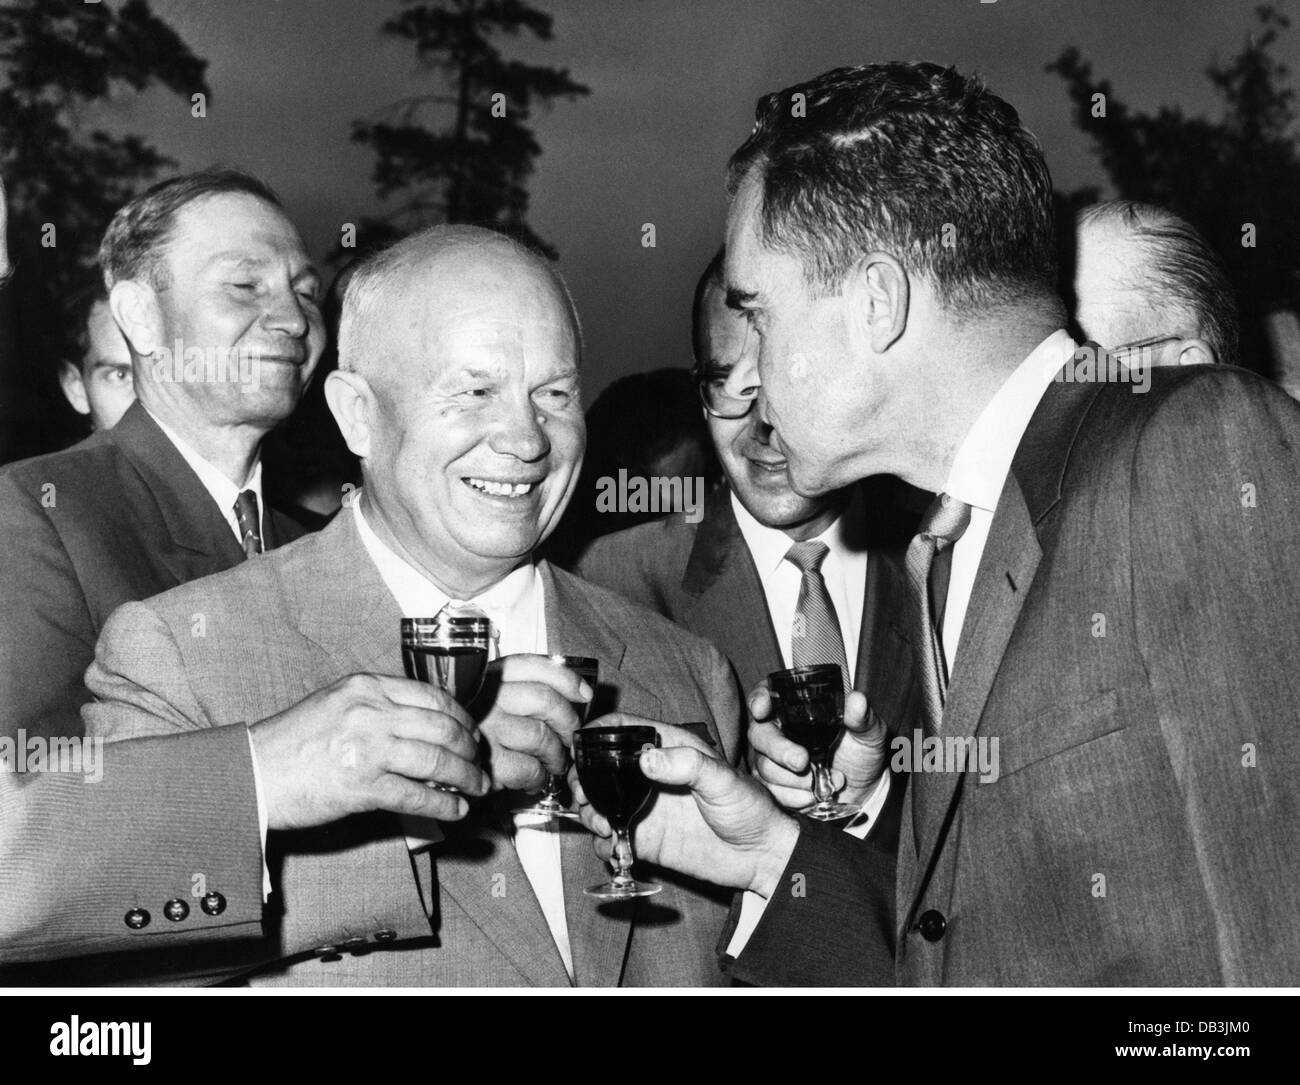 Khrushchev, Nikita Sergeyevich, 17.4.1894 - 11.9.1971, Soviet politician (CPSU), chairman of the council of ministers of the Soviet Union 14.9.1953 - 14.10.1964, visit to the USA, conversation with vice president Richard Nixon, Washington D.C., 24.7.1959, Stock Photo